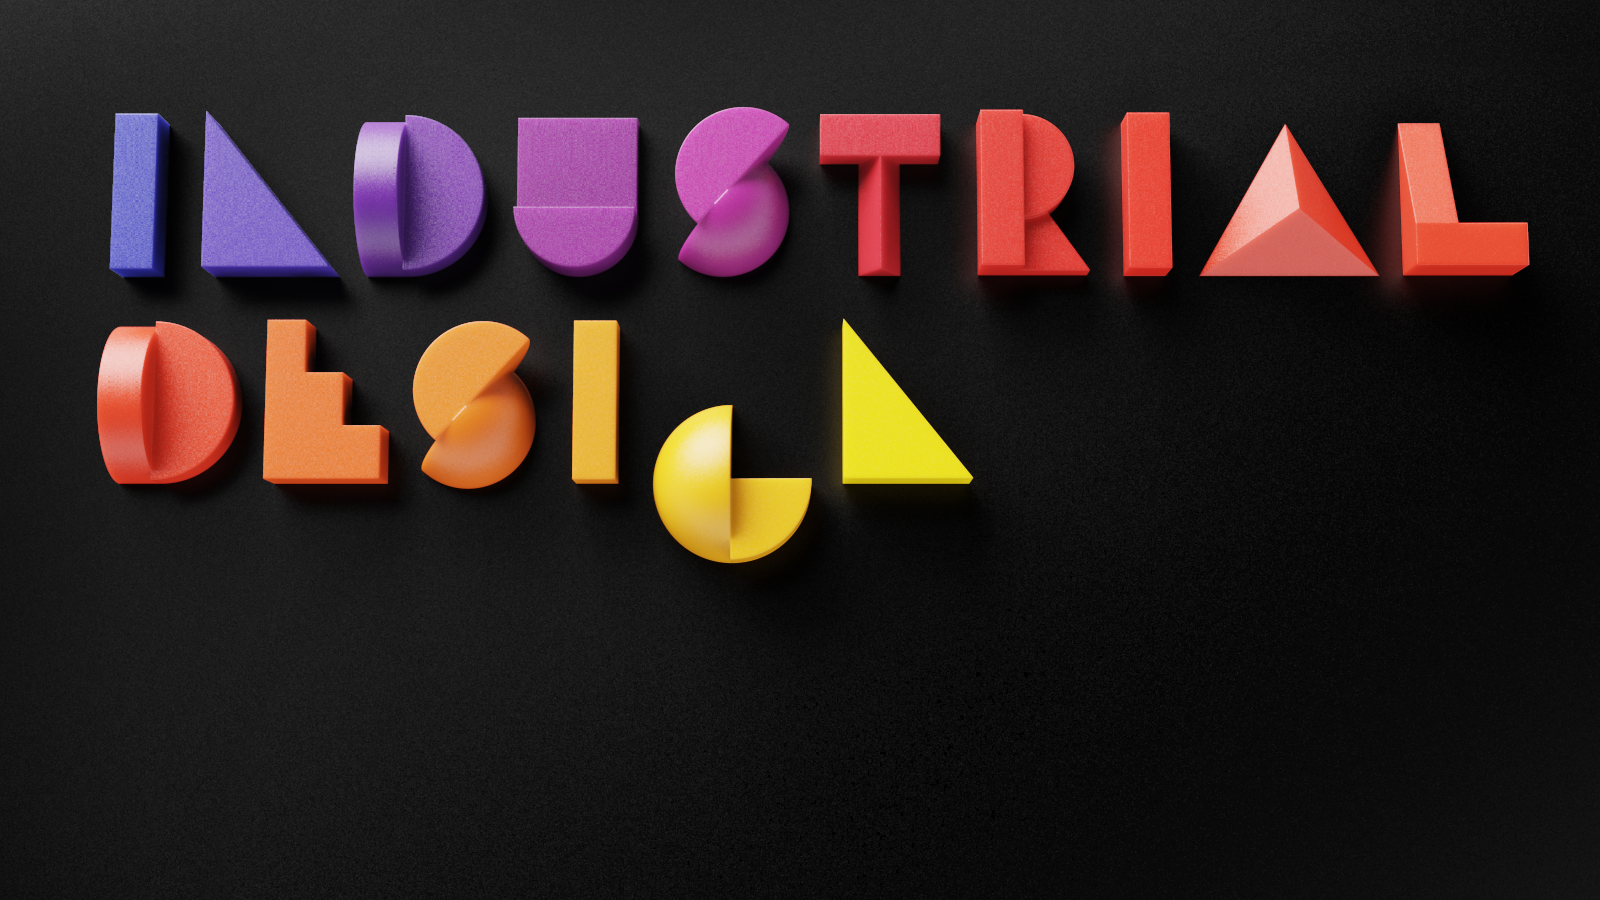 "Industrial Design" spelled out in colorful 3D object based letterforms on a black background.